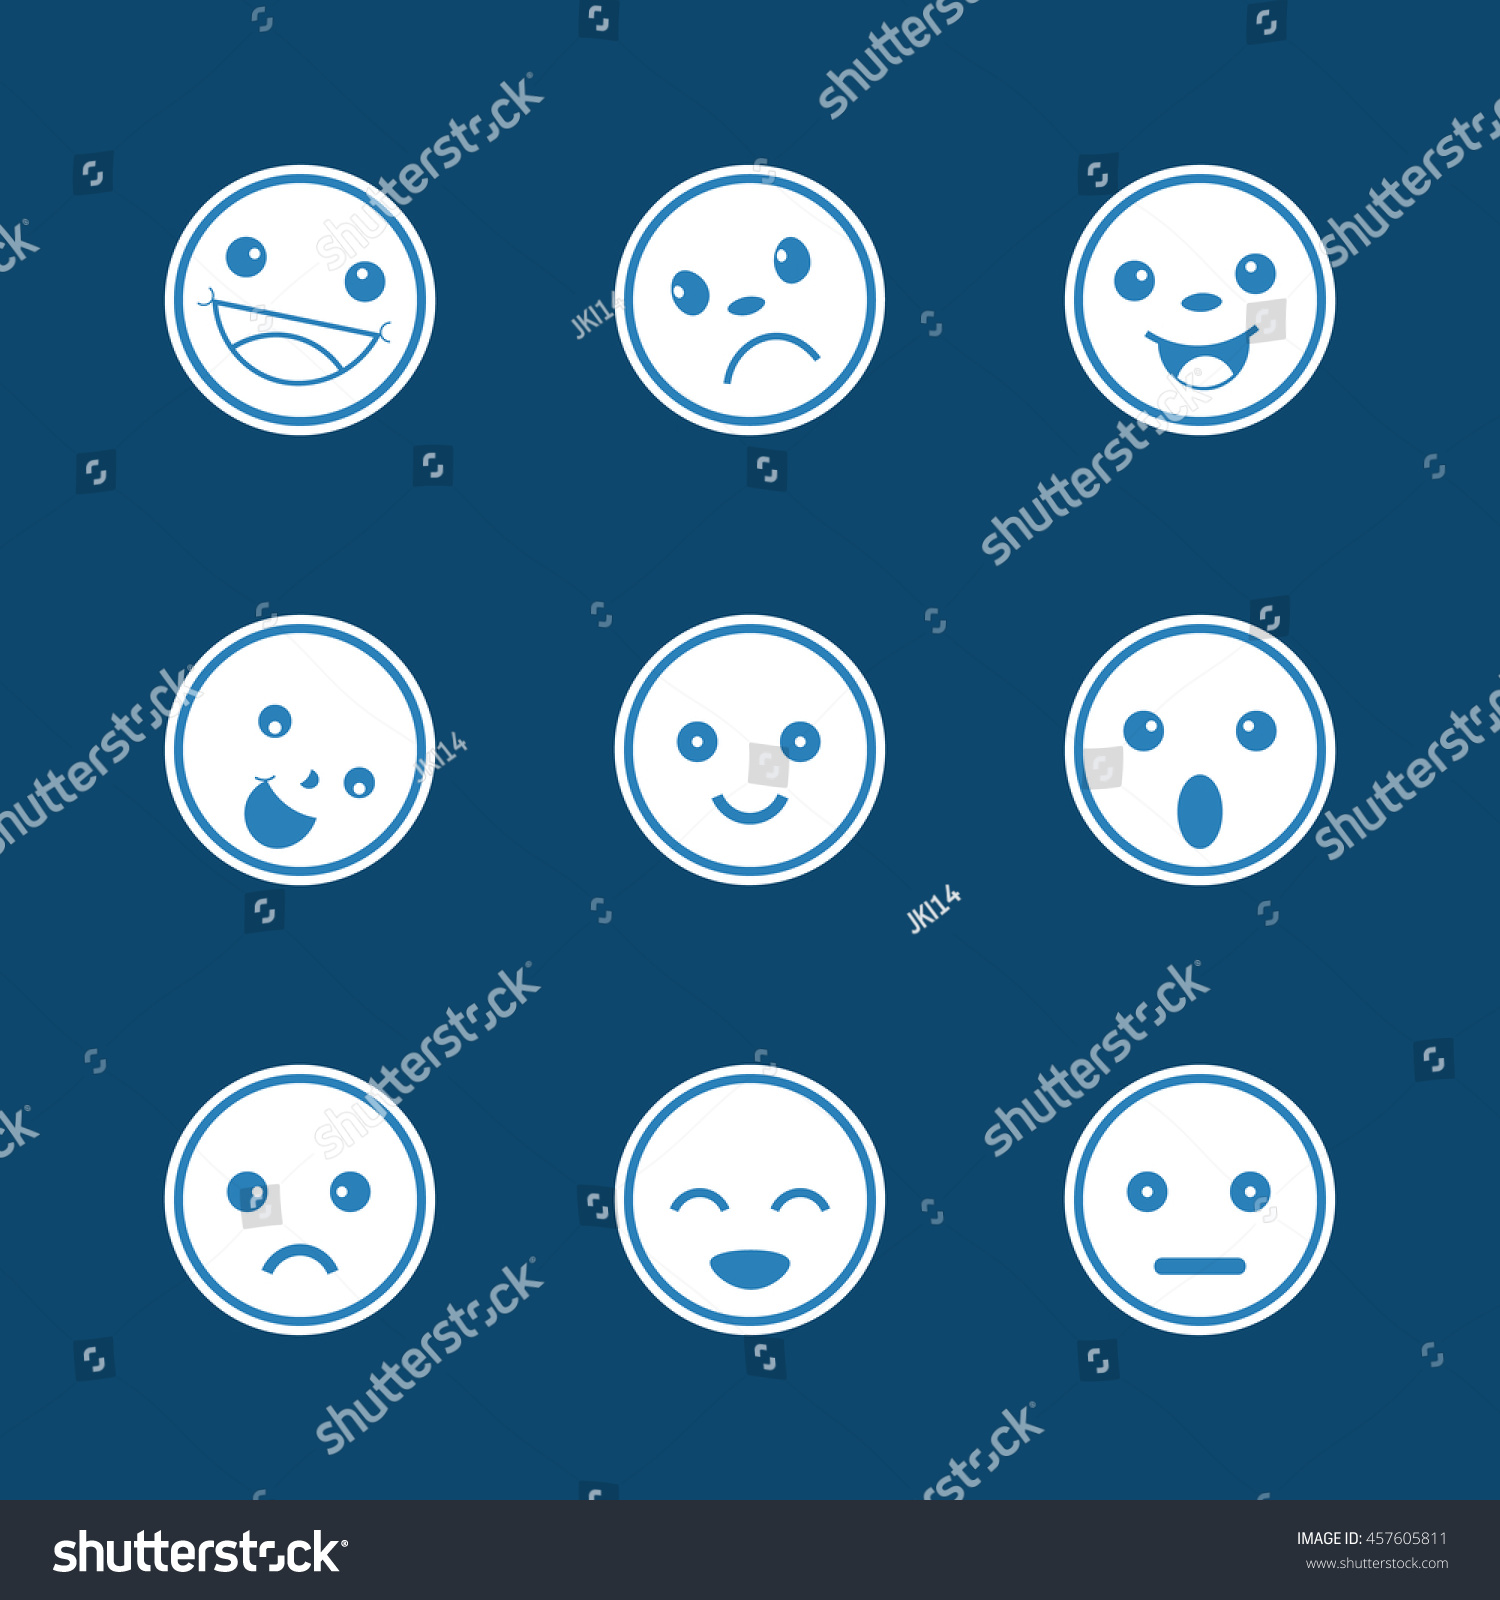 Set Of Different Emotions Icons Stock Vector Illustration 457605811 ...